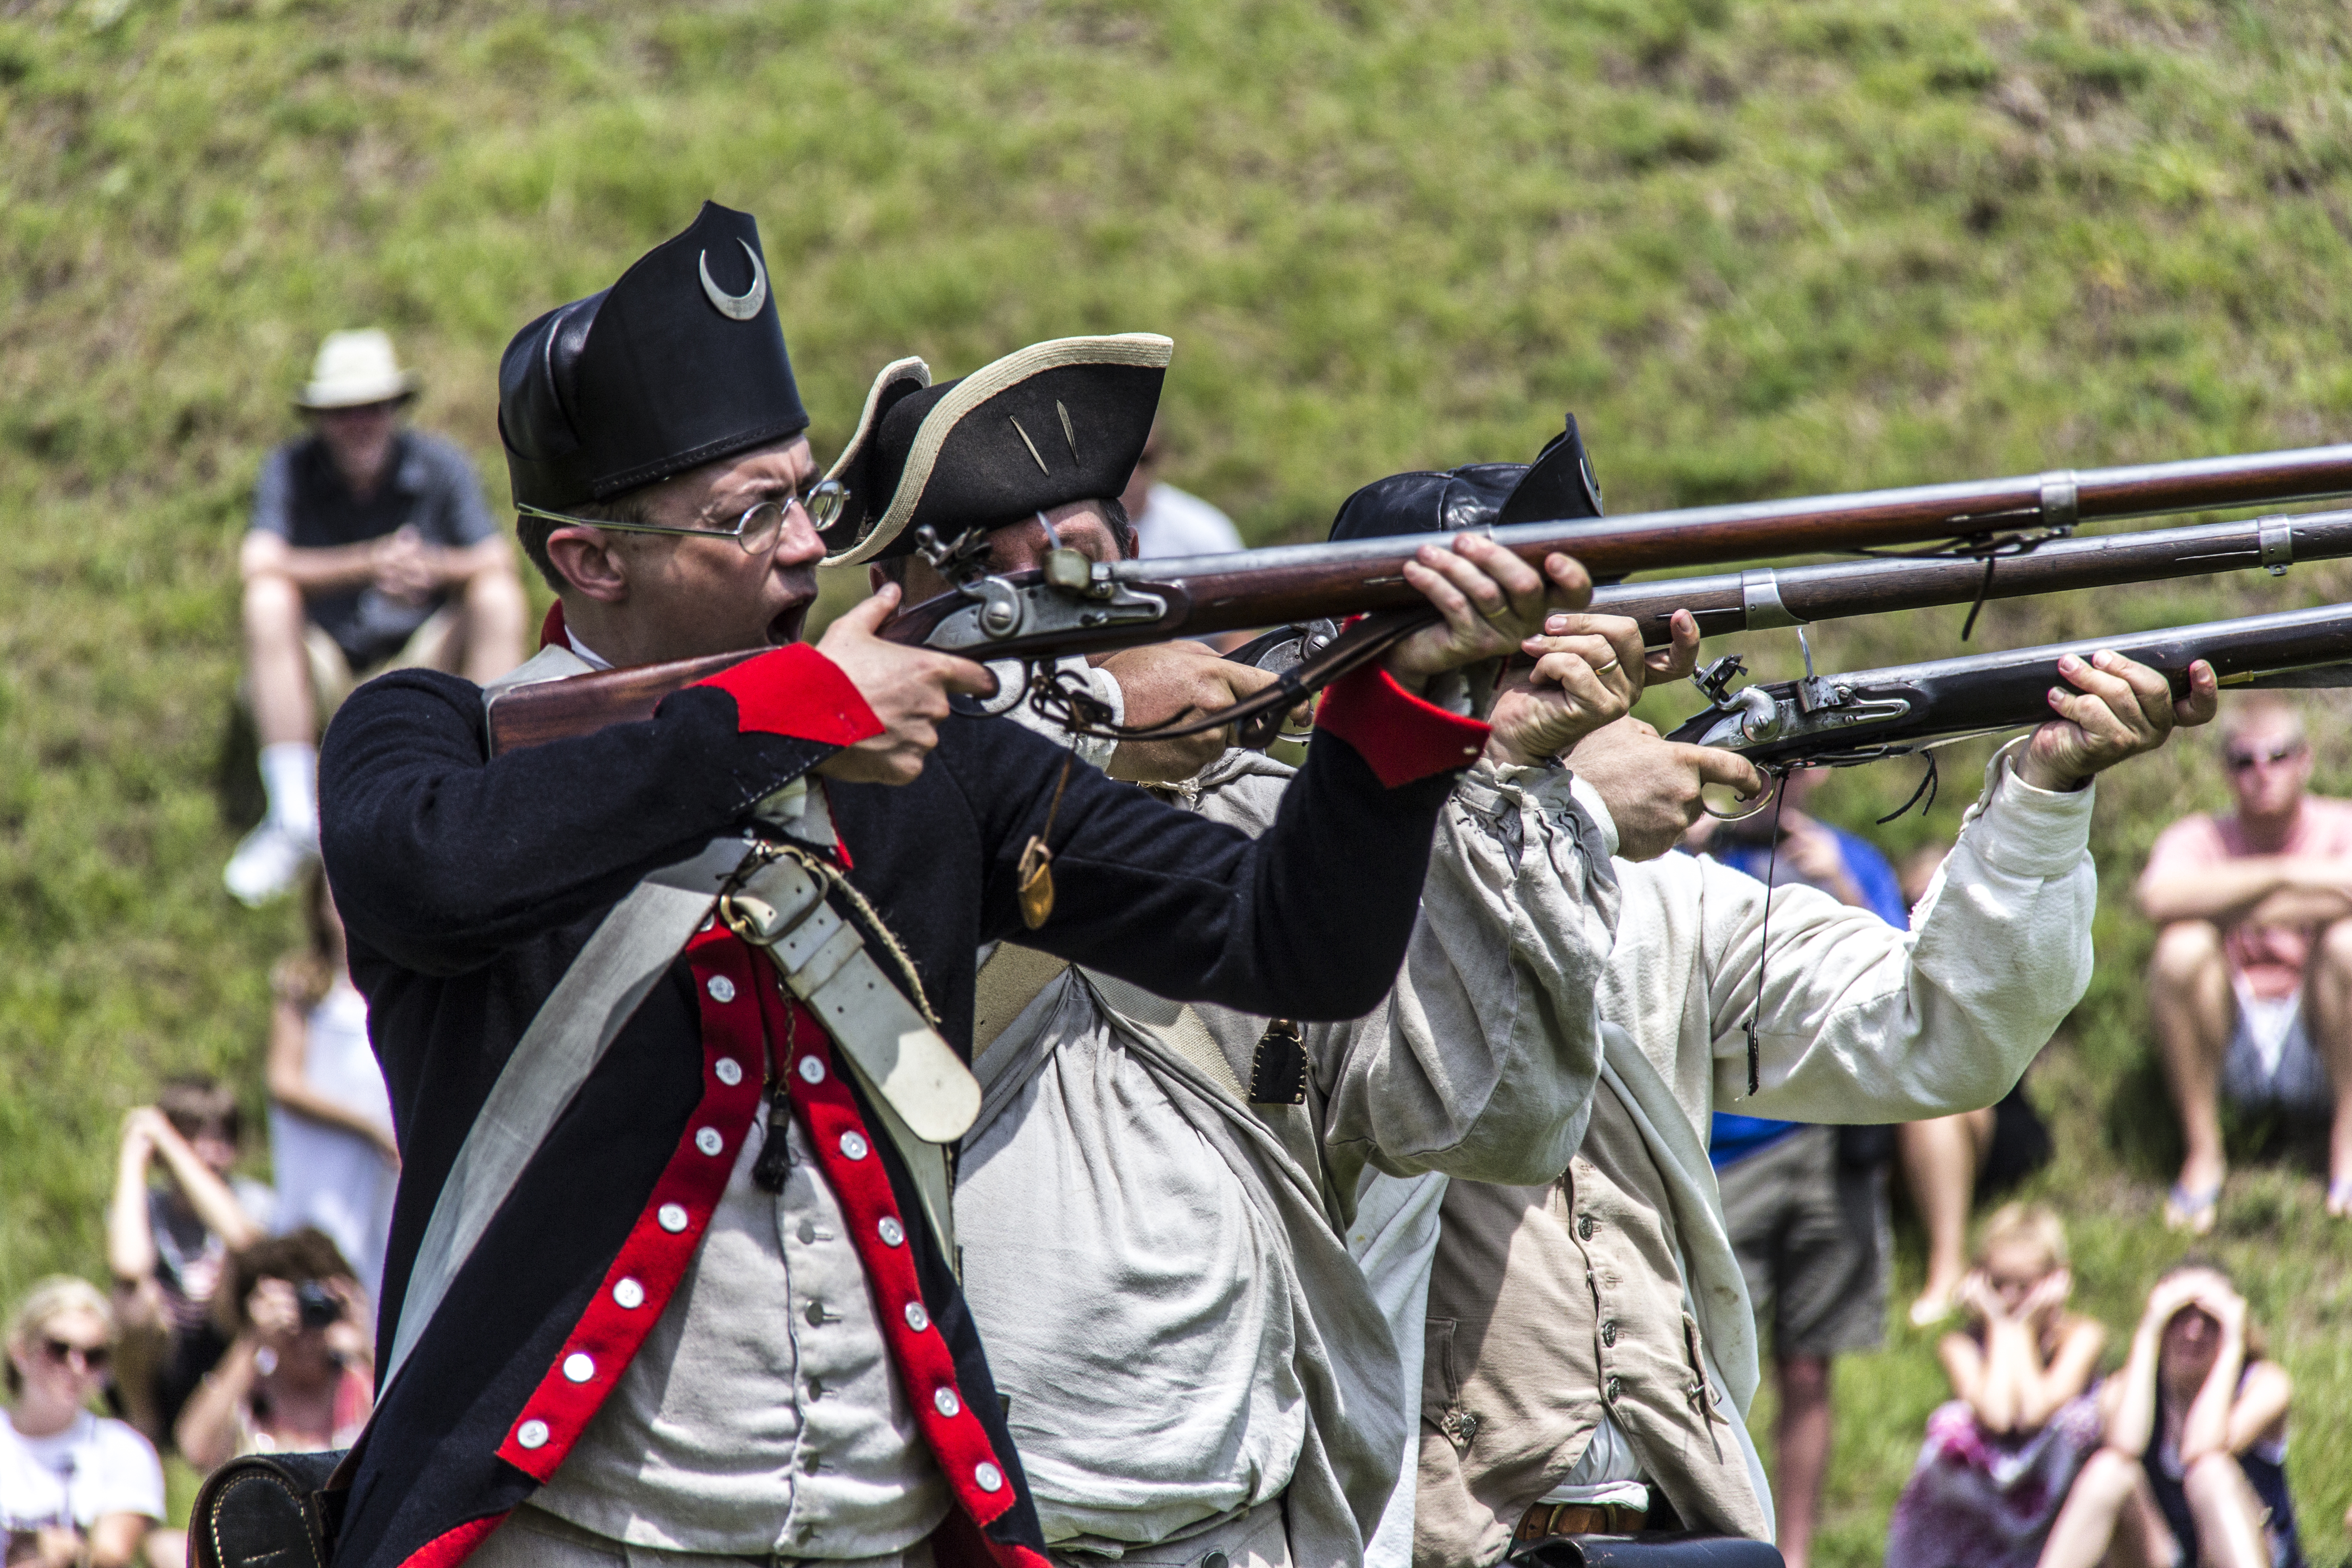 Reenactors firing muskets in uniform representing soldiers from the American Revolution